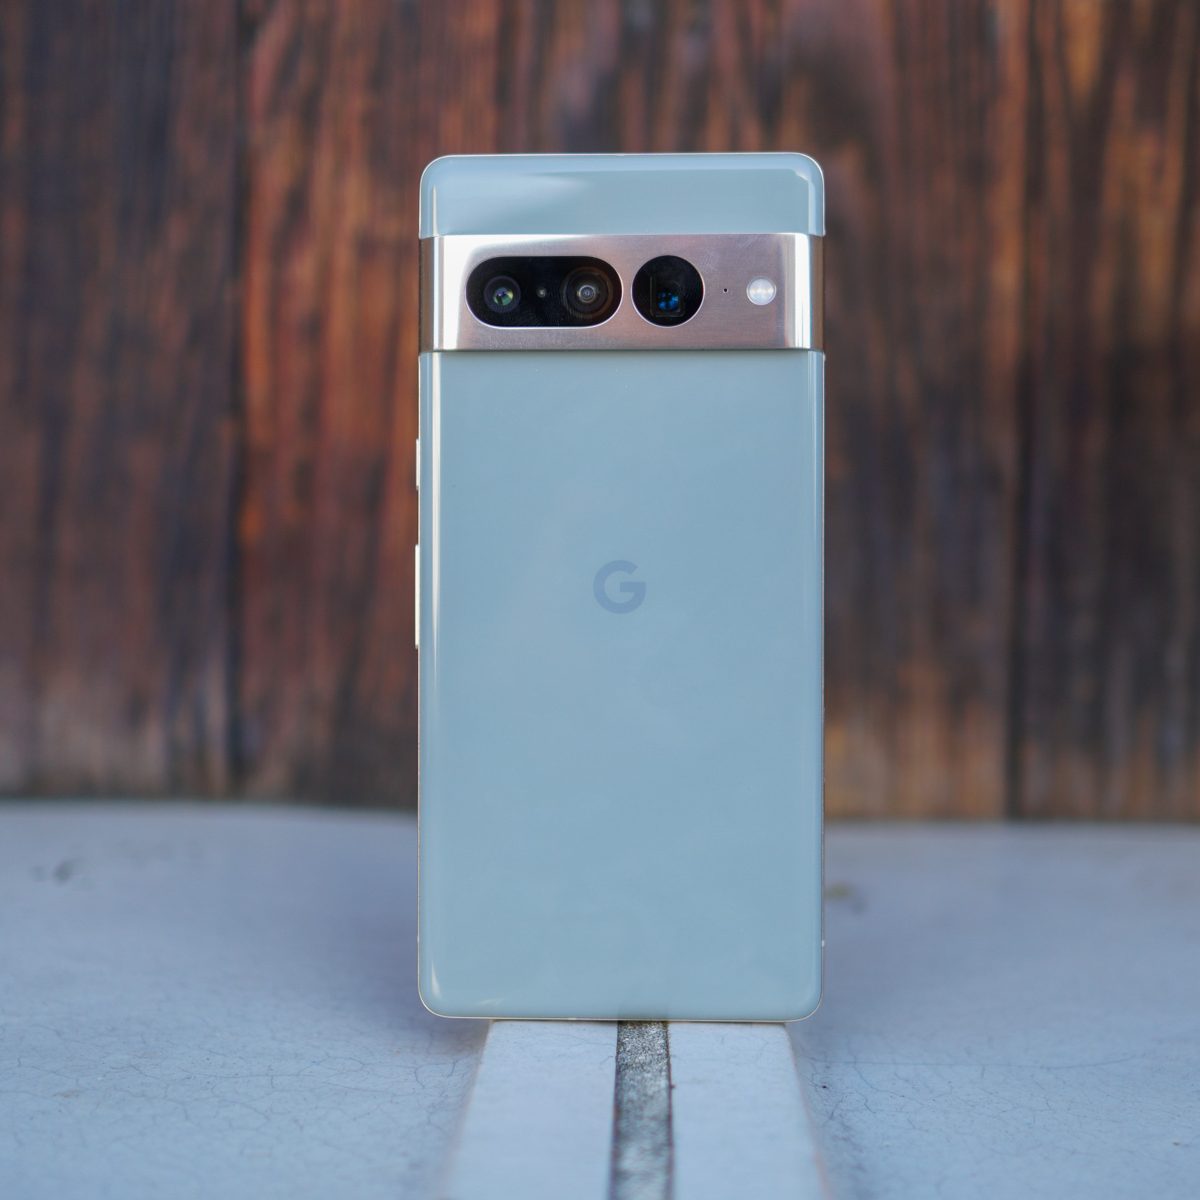 Pixel 7 Pro review: Big features from Google at a fair price